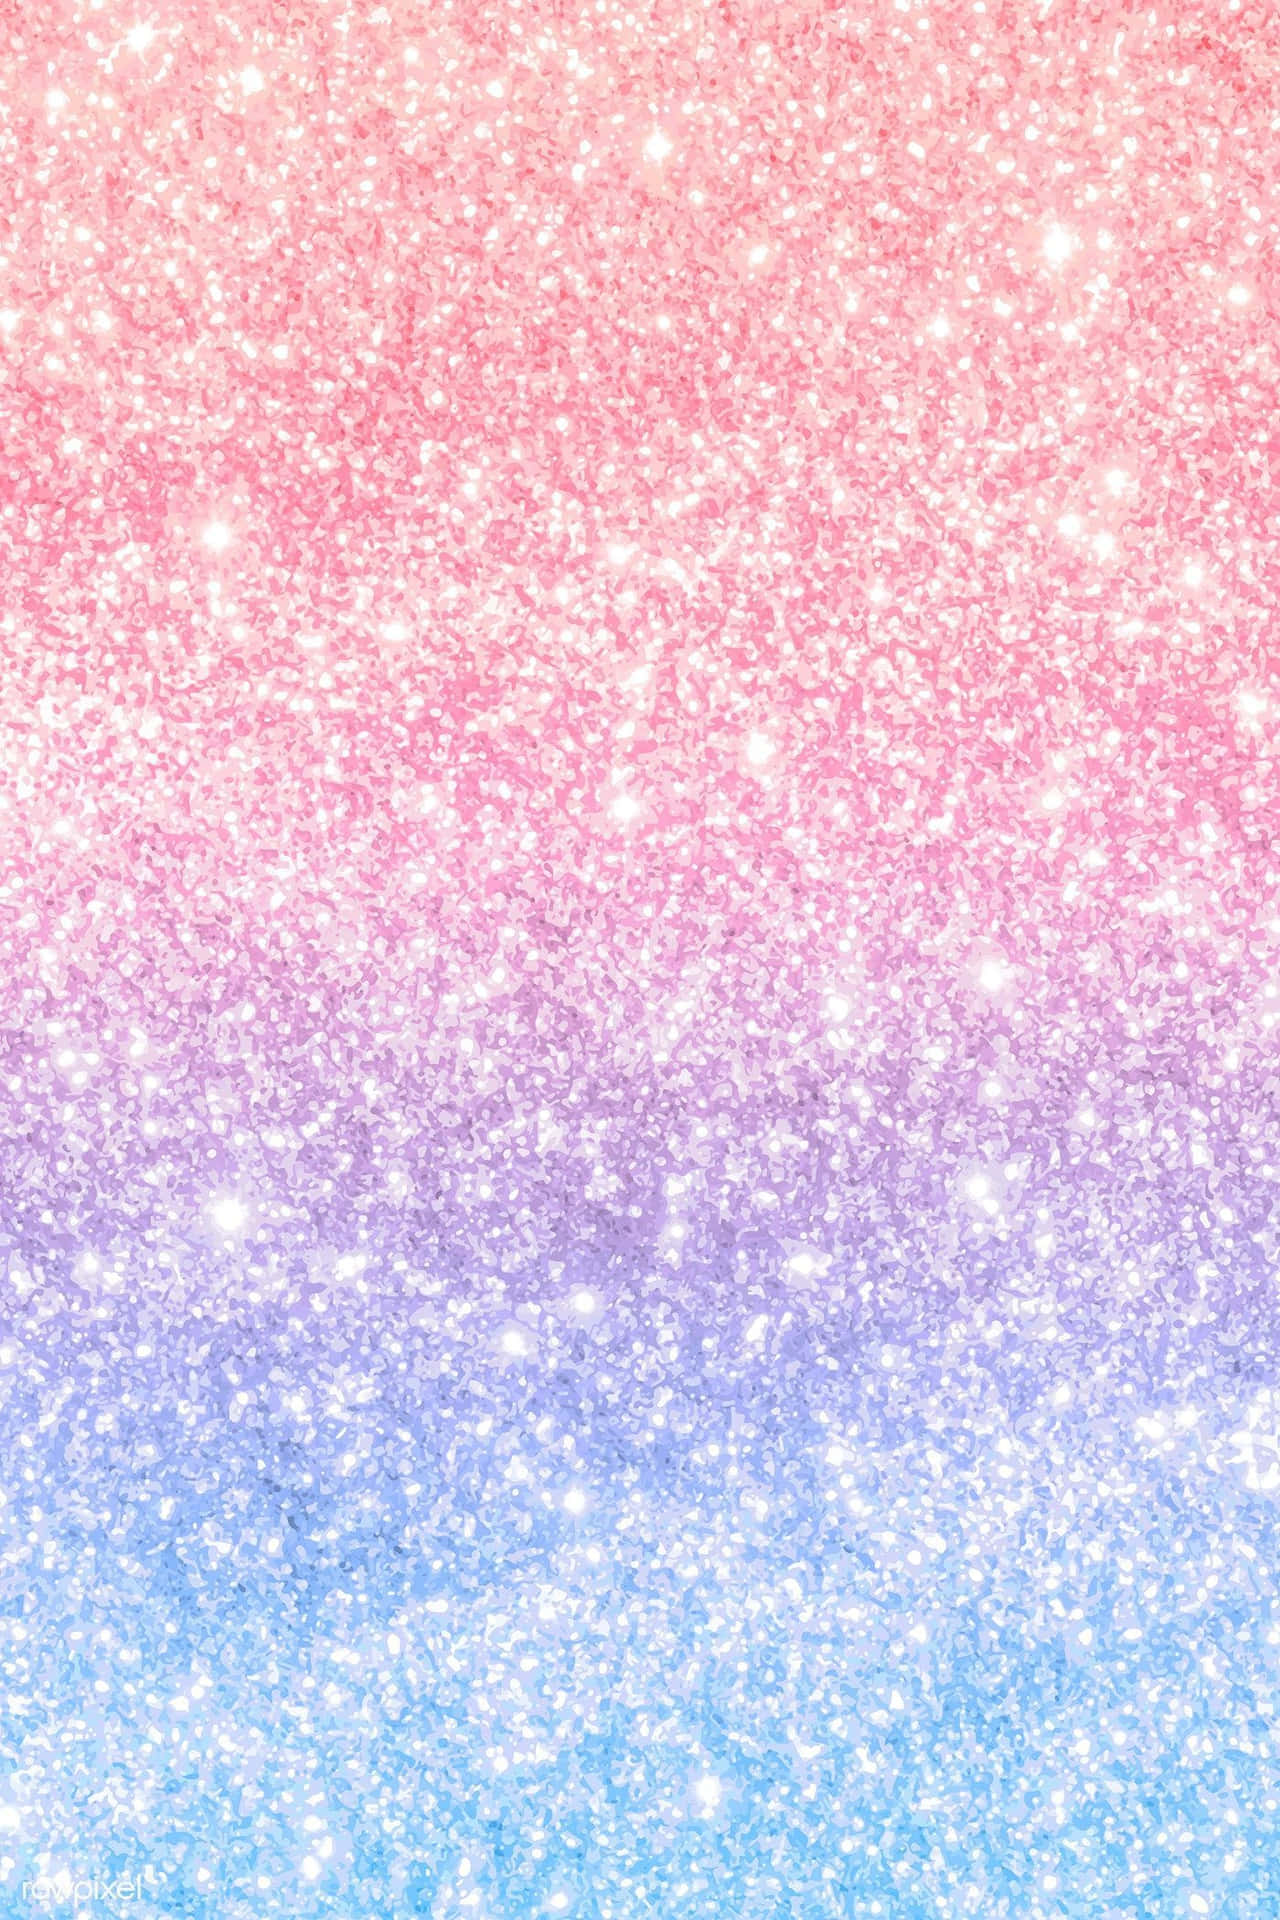 A Pink And Blue Glitter Background